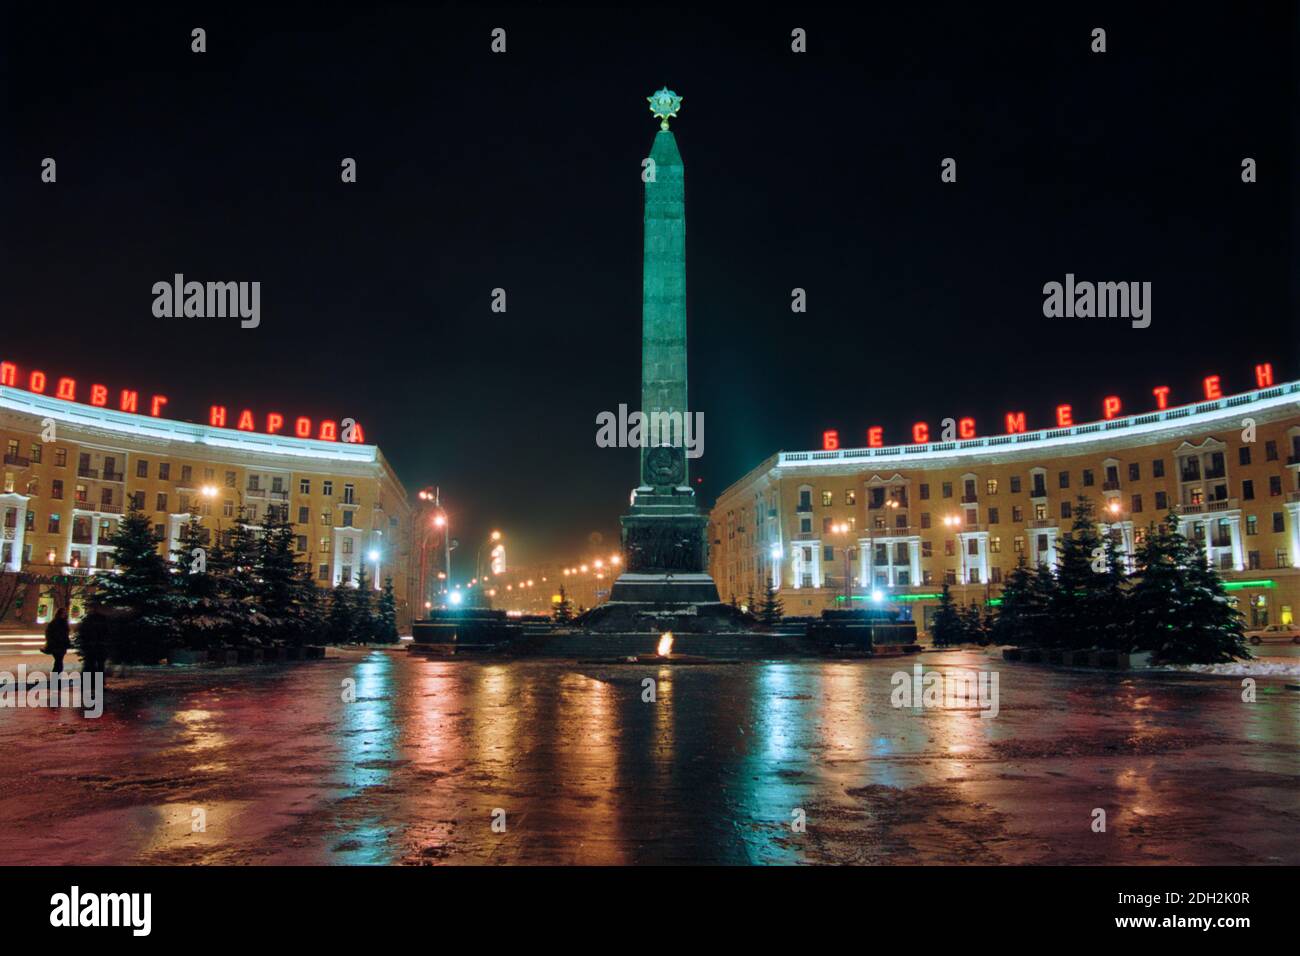 Victory Square at night, Minsk, Belarus Stock Photo